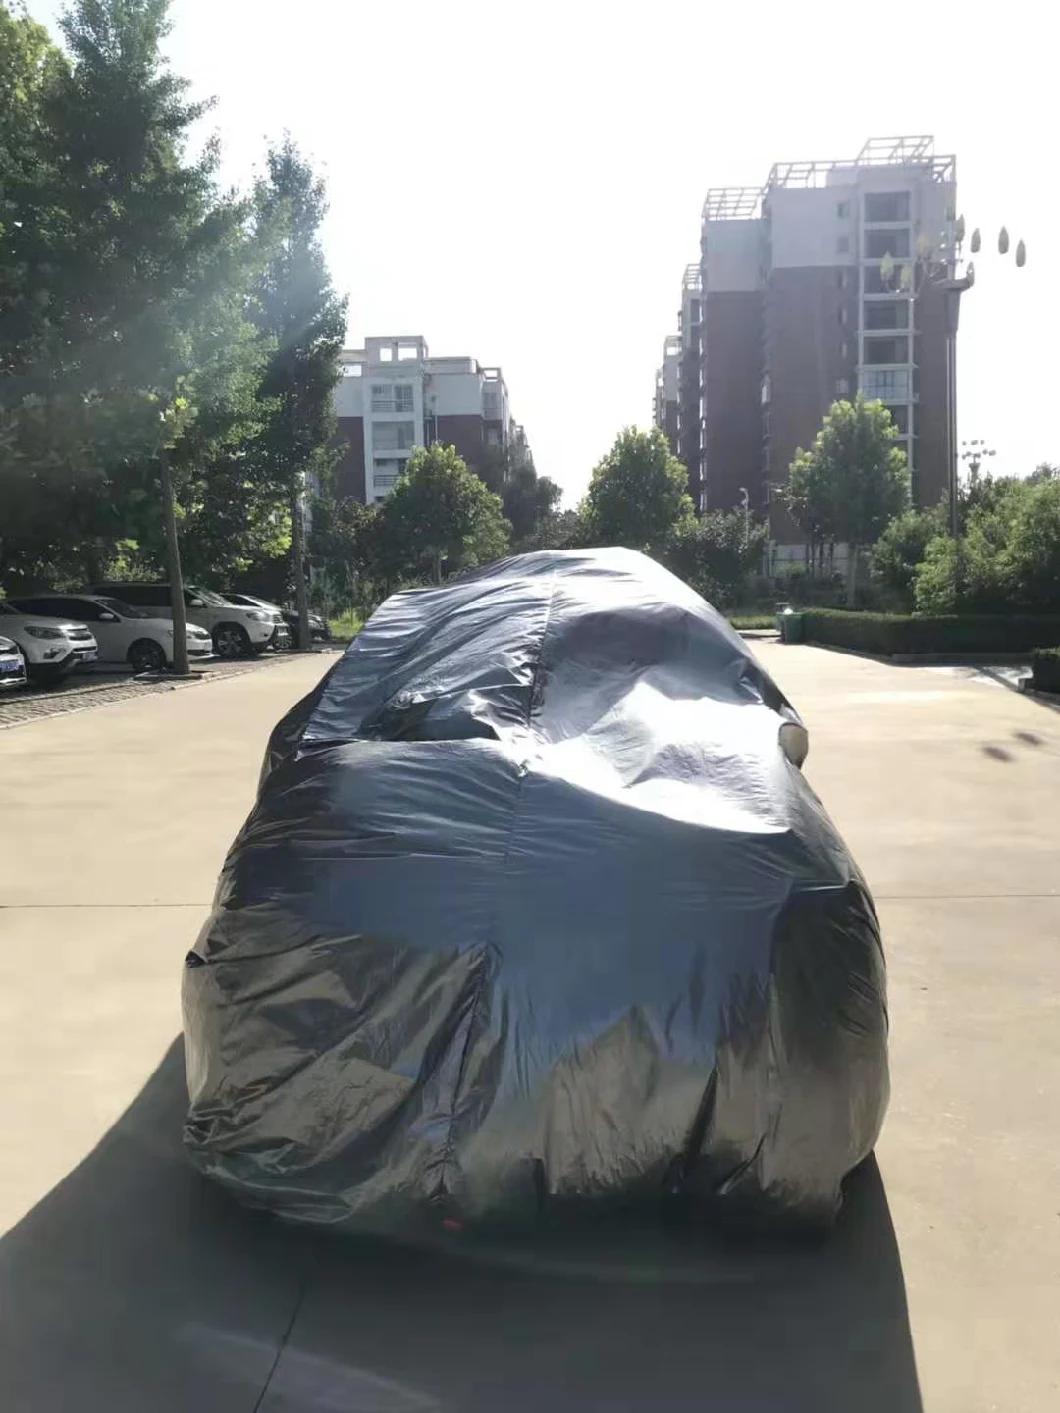 Best Price Superior Quality LDPE Dustproof 4.8 X 7.5m Plastic Car Cover